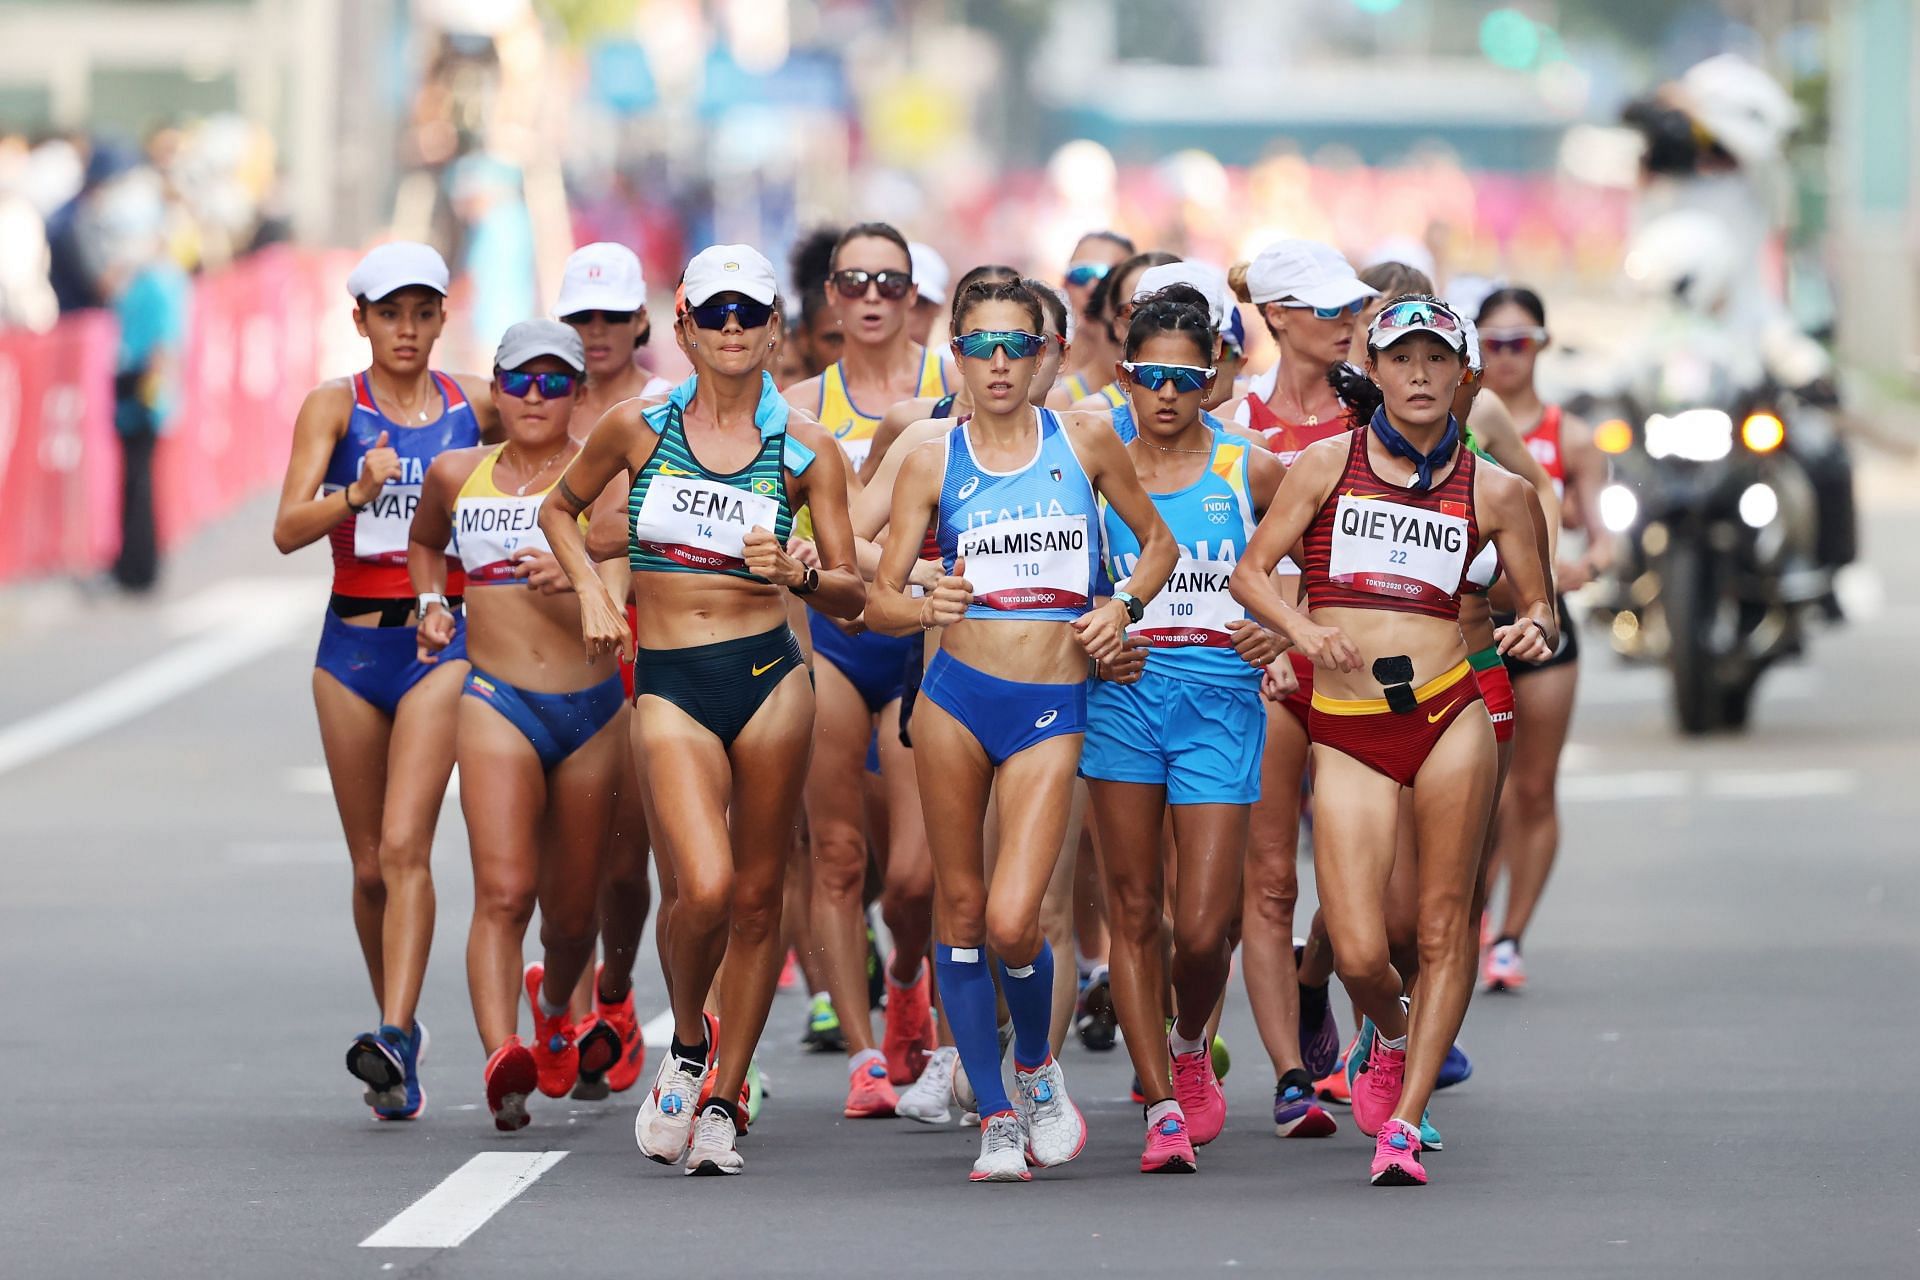 Action from the Race Walk event at the Tokyo Olympics (Image courtesy: Getty Images)